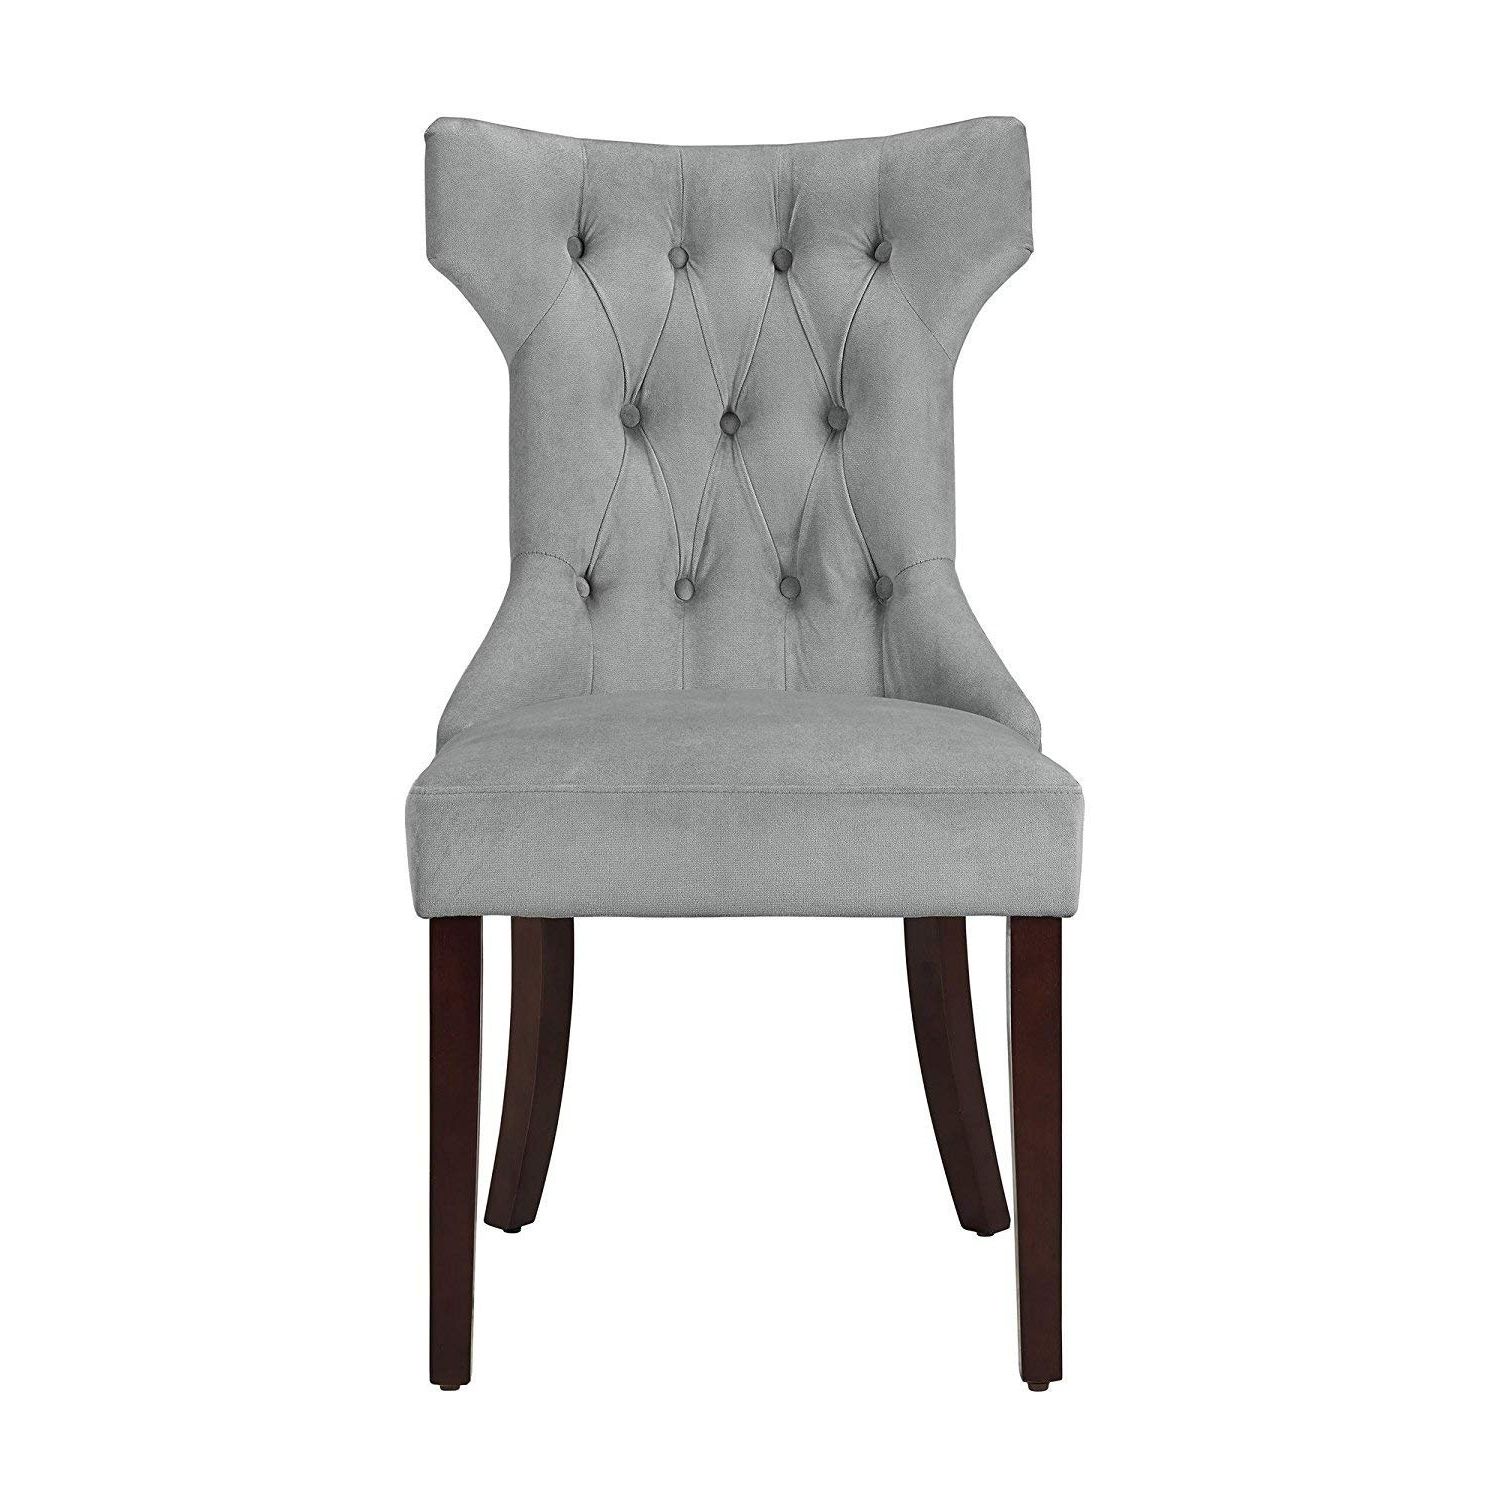 Hayden Ii Black Side Chairs Regarding Famous Amazon – Clairborne Tufted Dining Chair, Gray – Chairs (View 18 of 20)